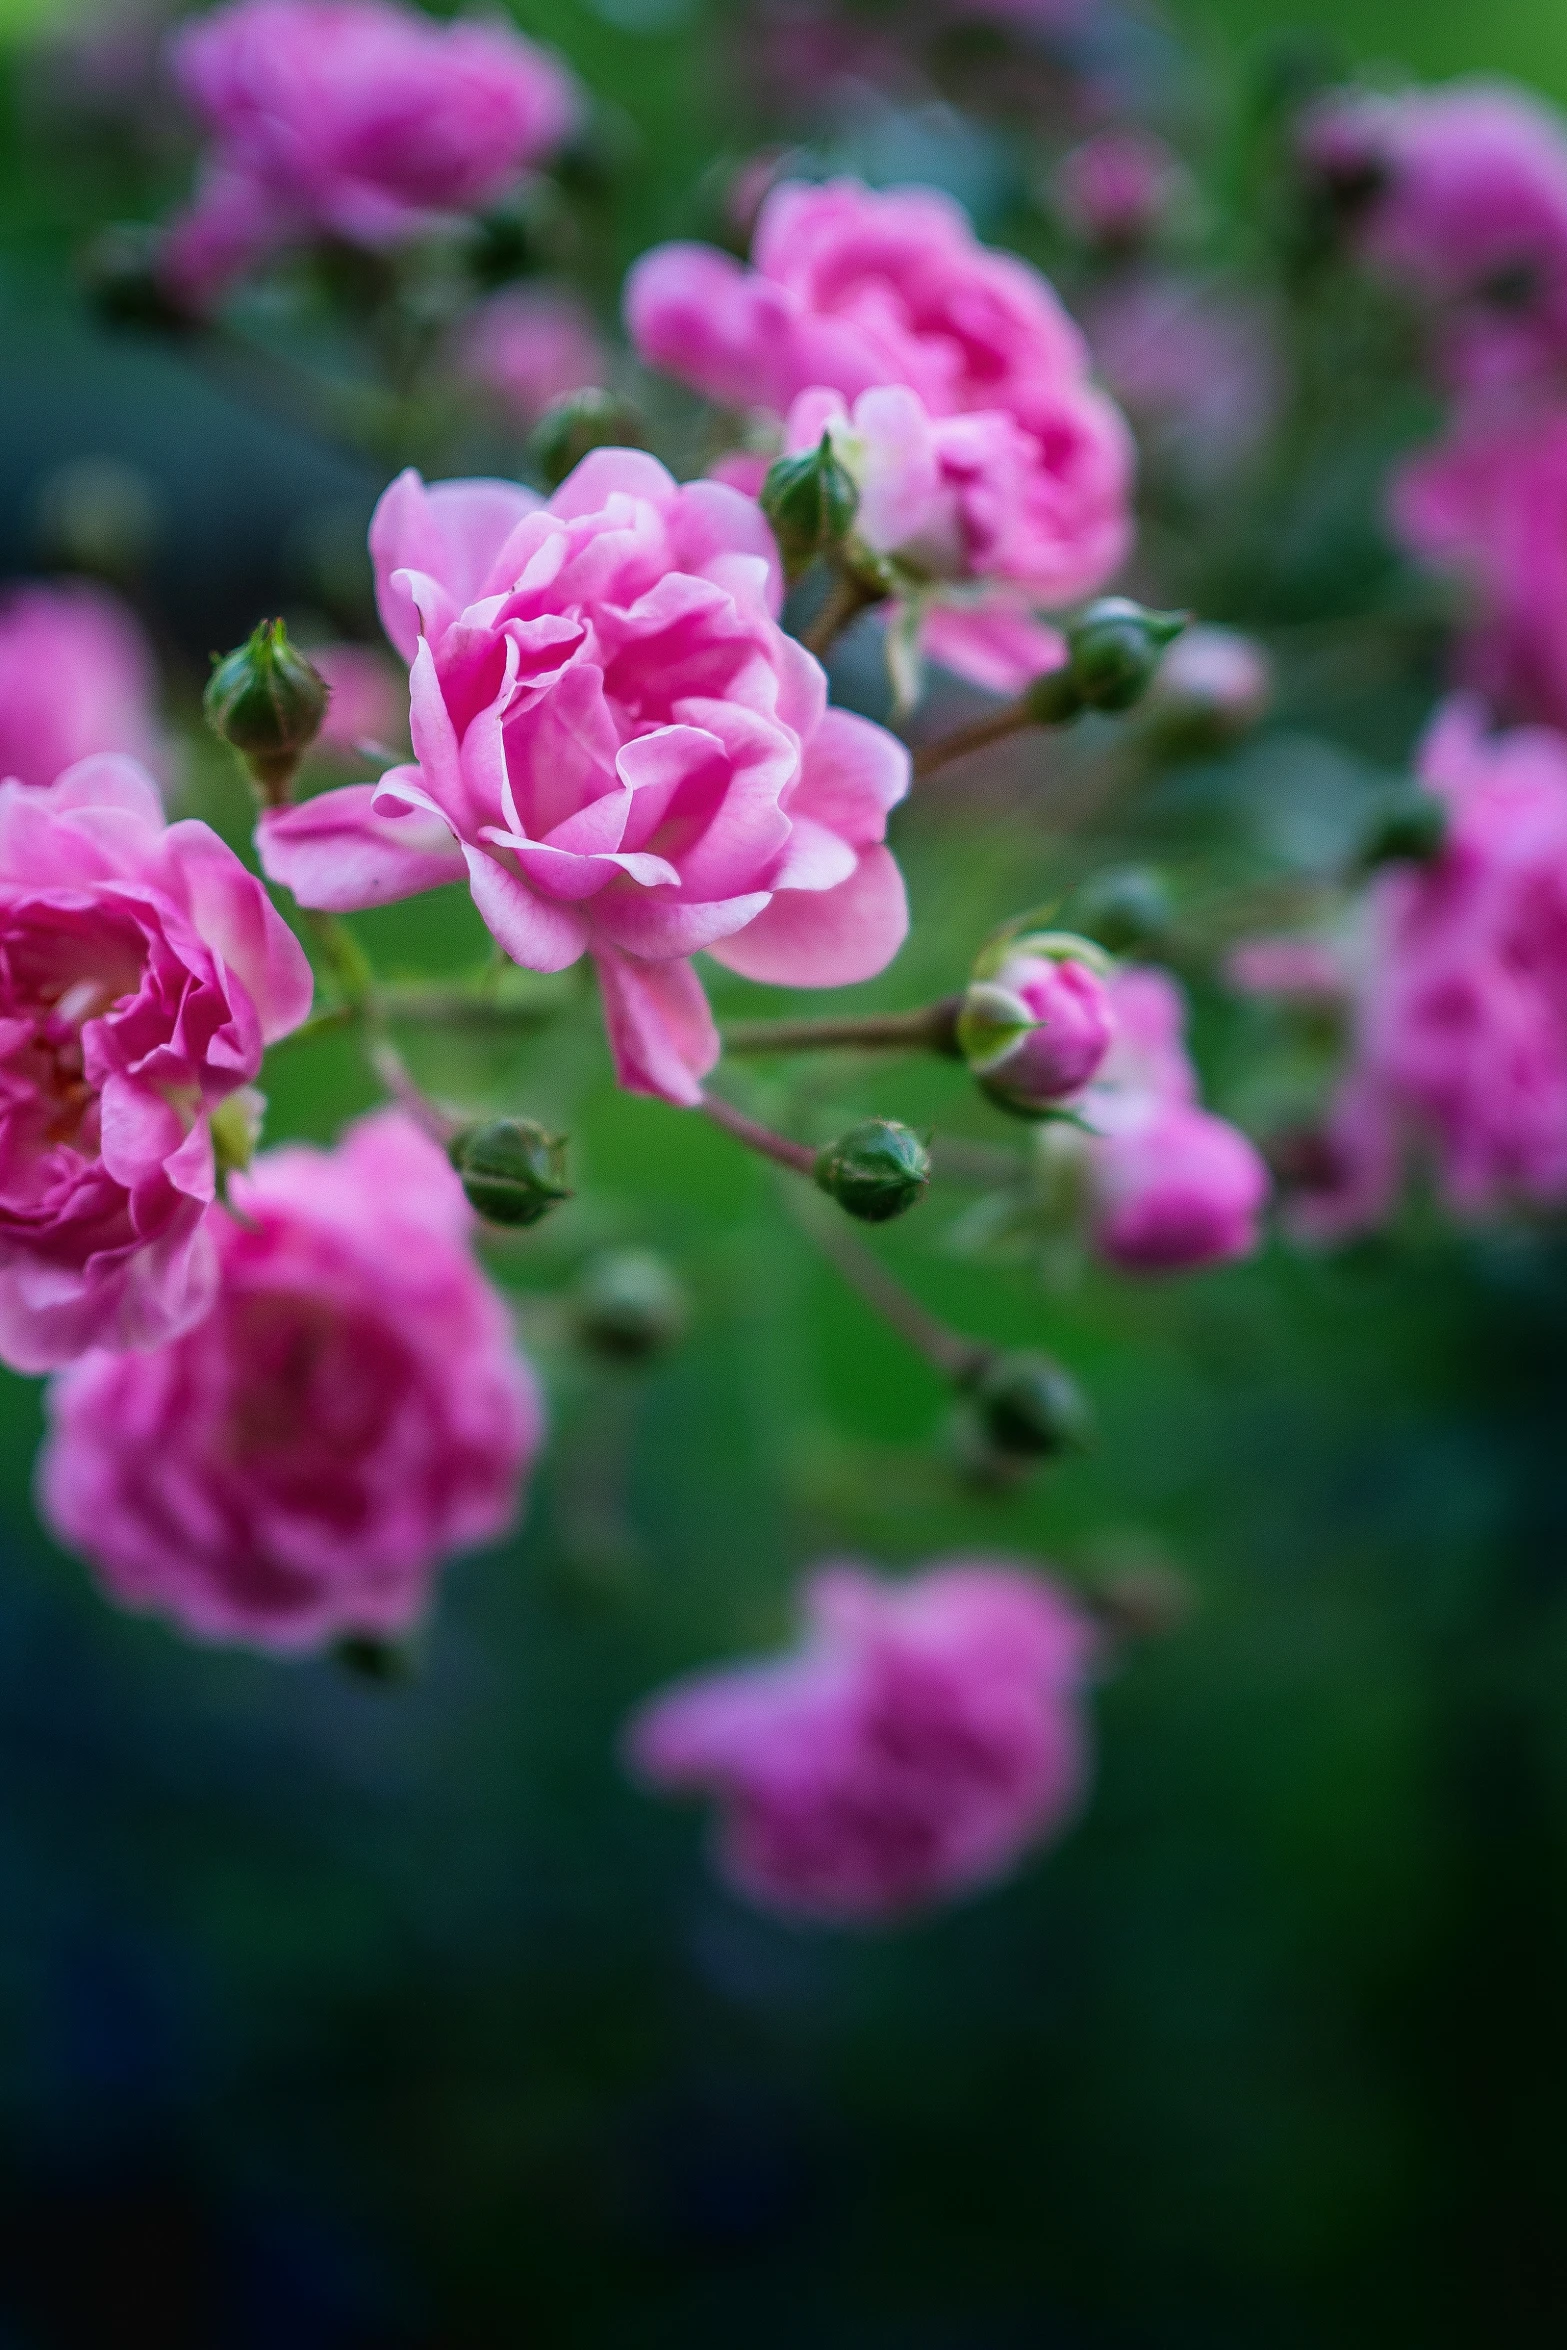 pink flowers in the garden with blurry background